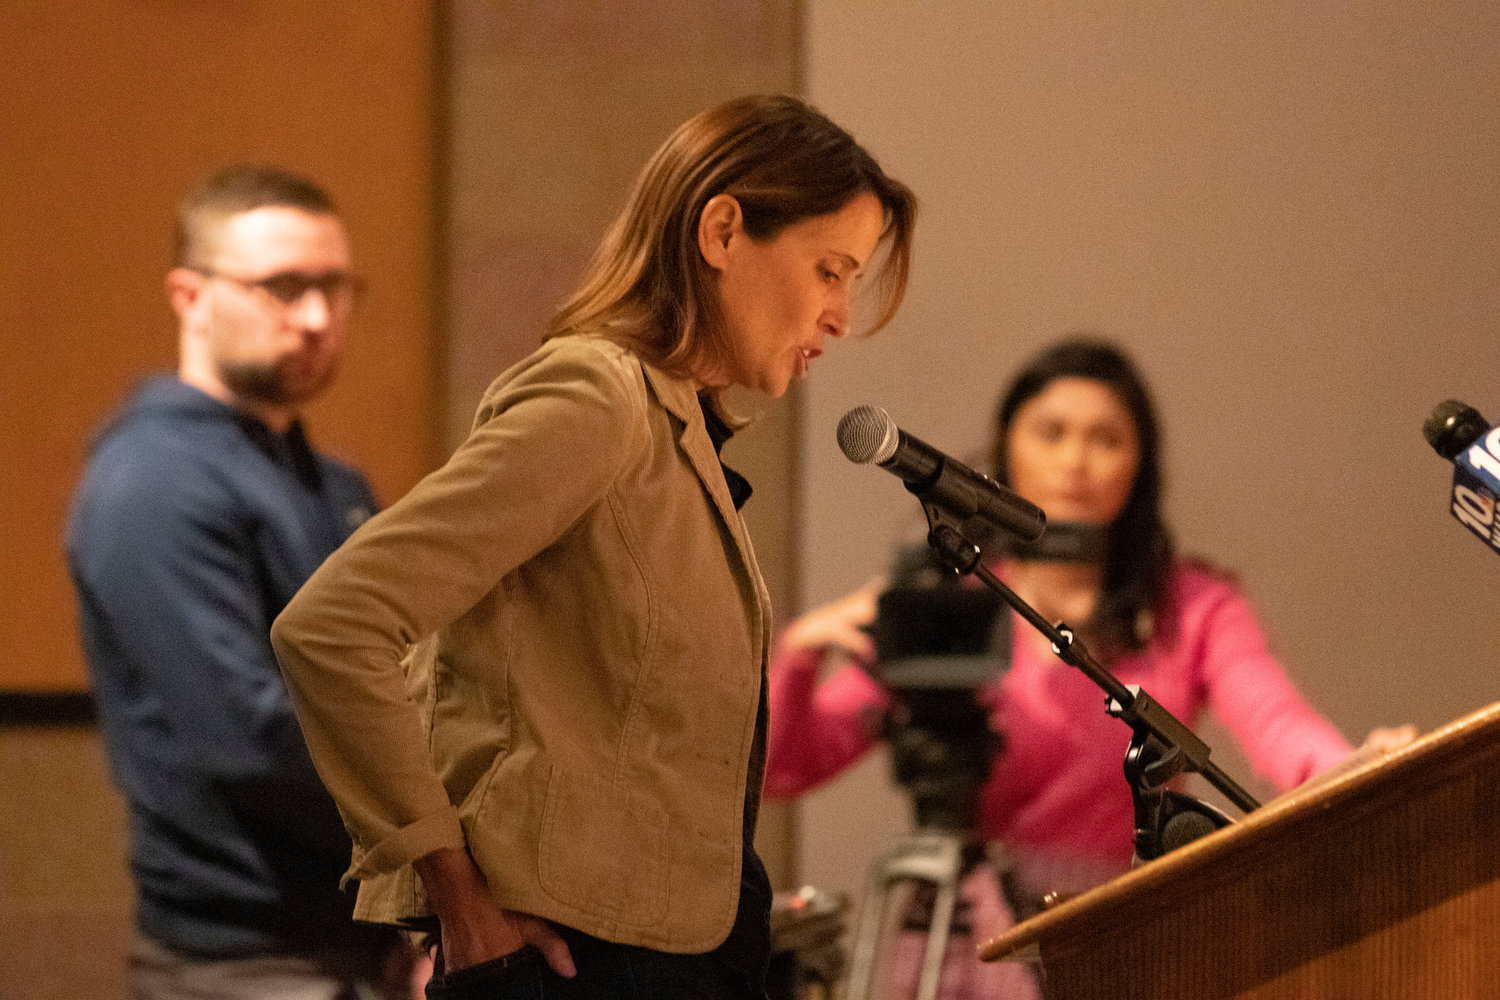 Julie Owens reads a statement to school officials during Wednesday night’s meeting at the BHS auditorium. Owens said the district’s problems are a “self-inflicted wound” and could have been avoided if officials just listened to the lived experiences of parents and students.